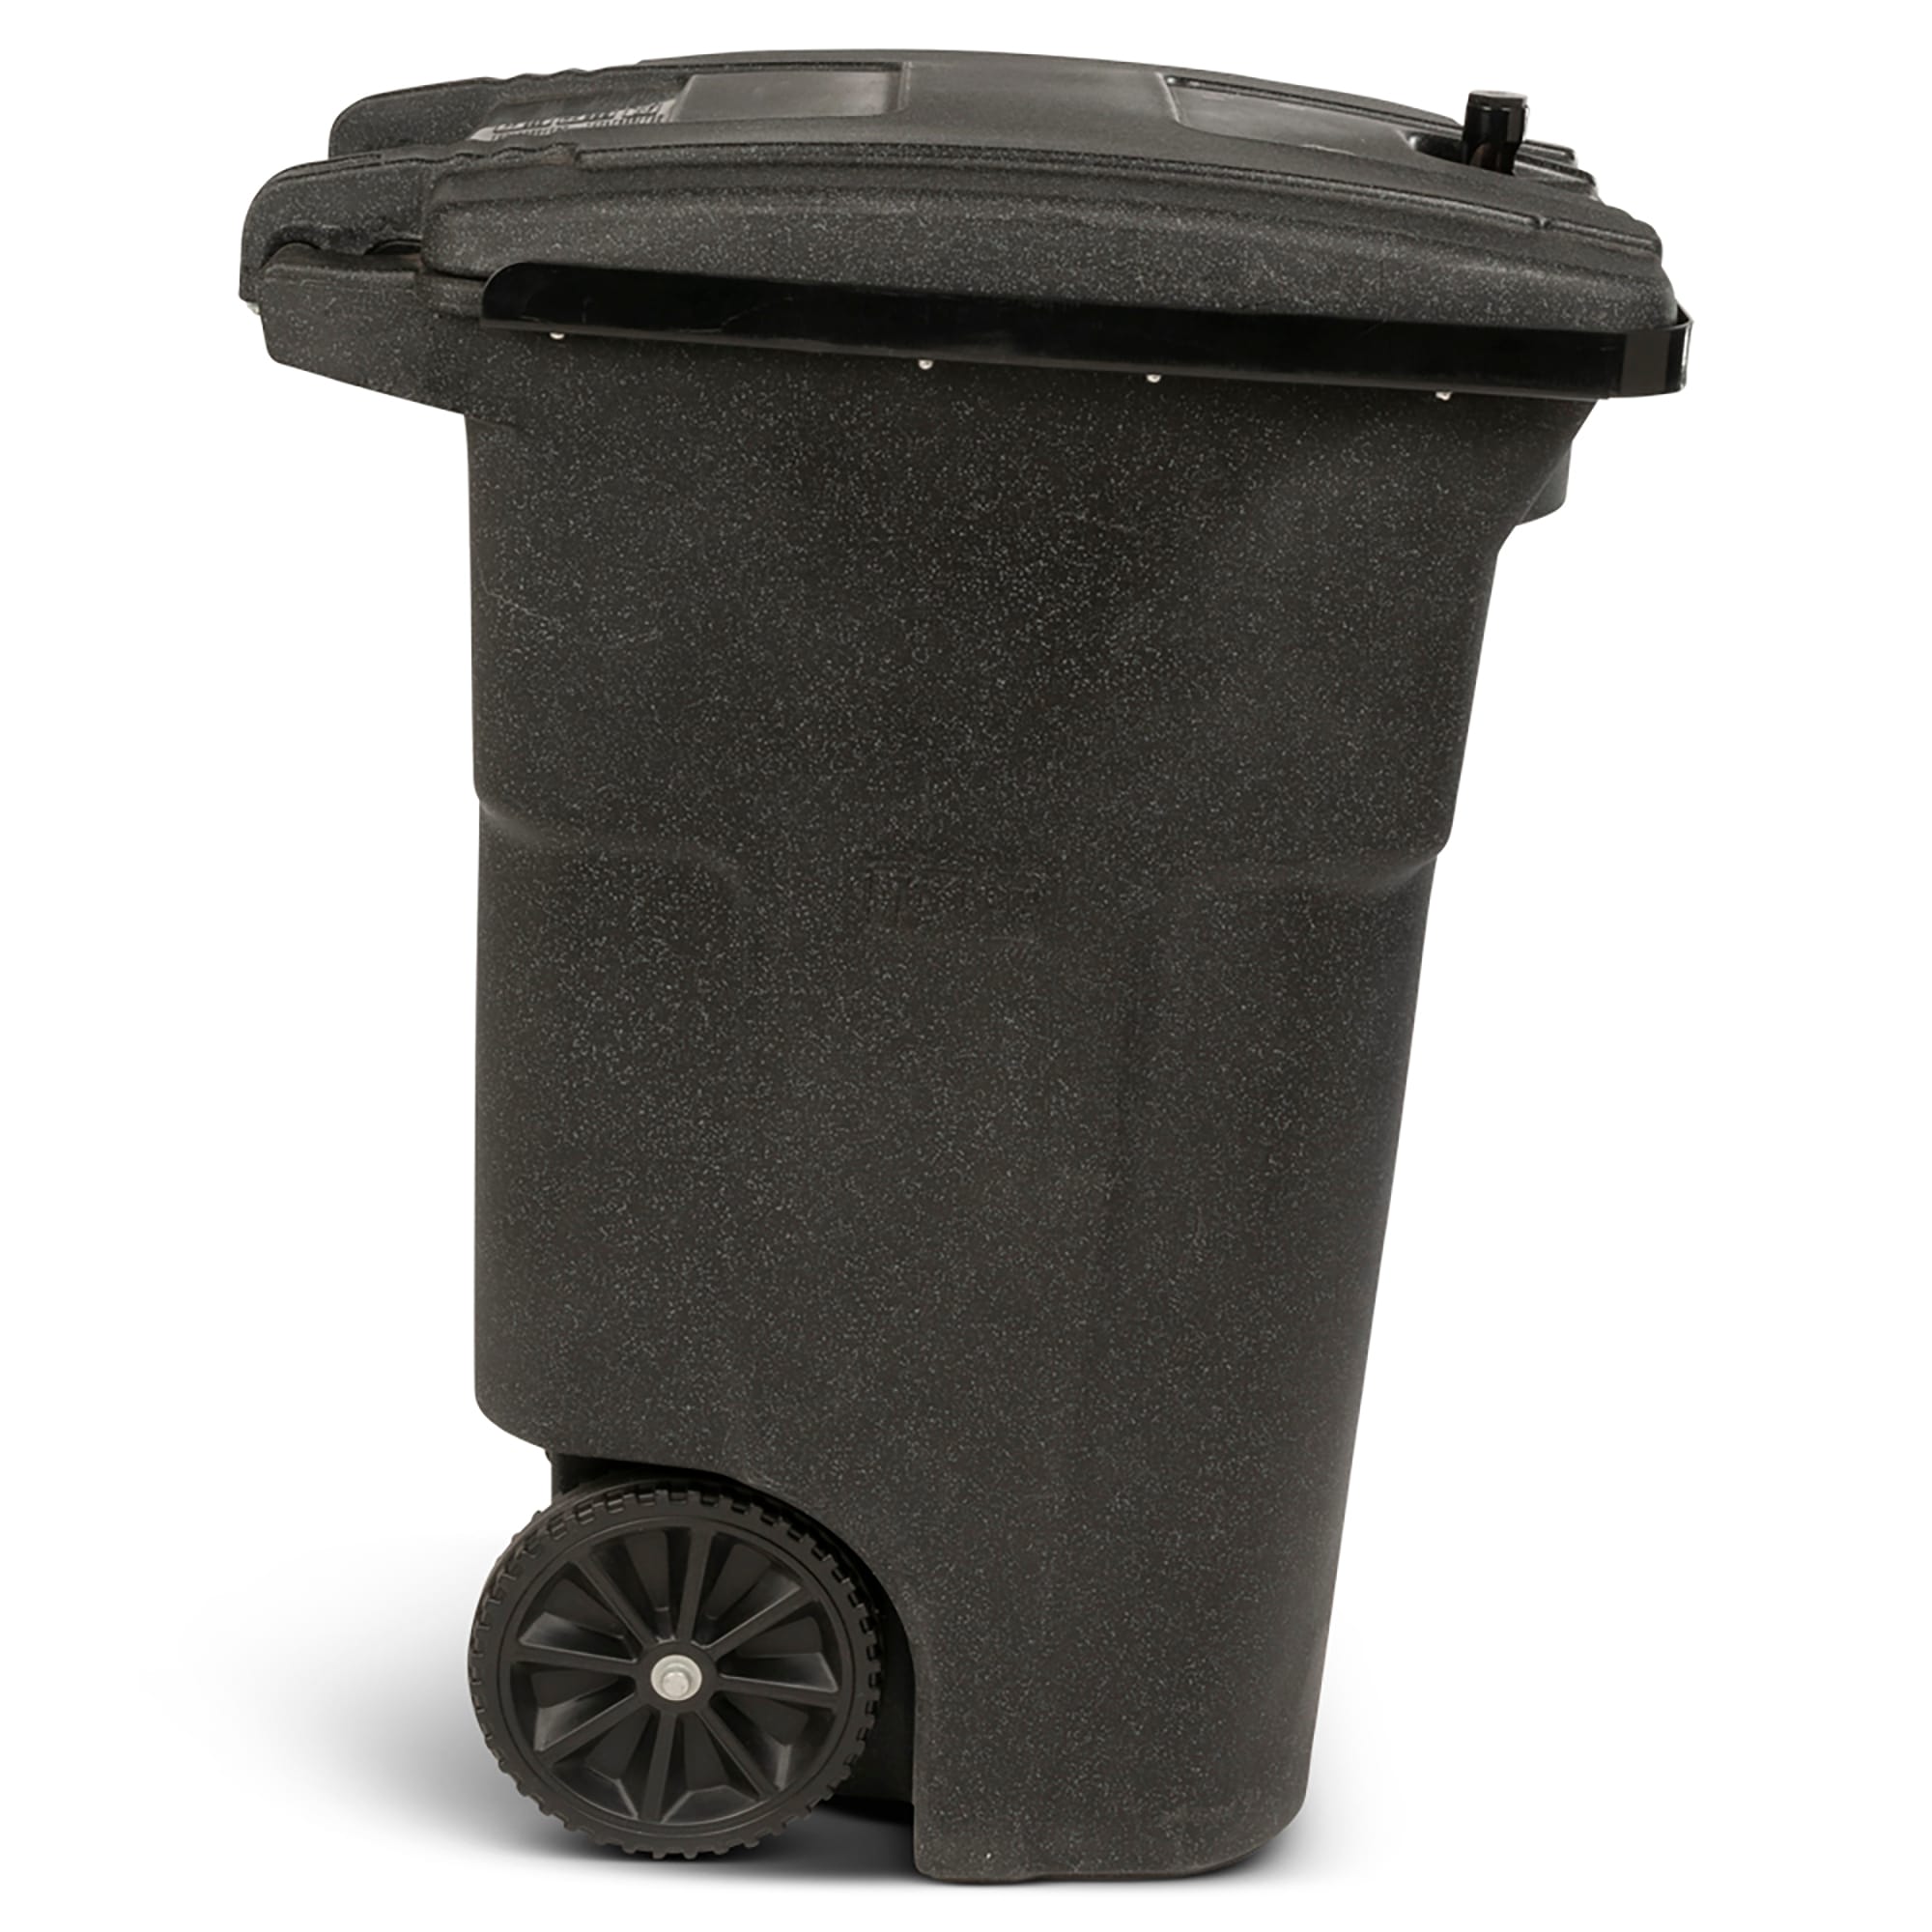 Toter 96 Gallon Blackstone Outdoor Trash Can/Garbage Can with